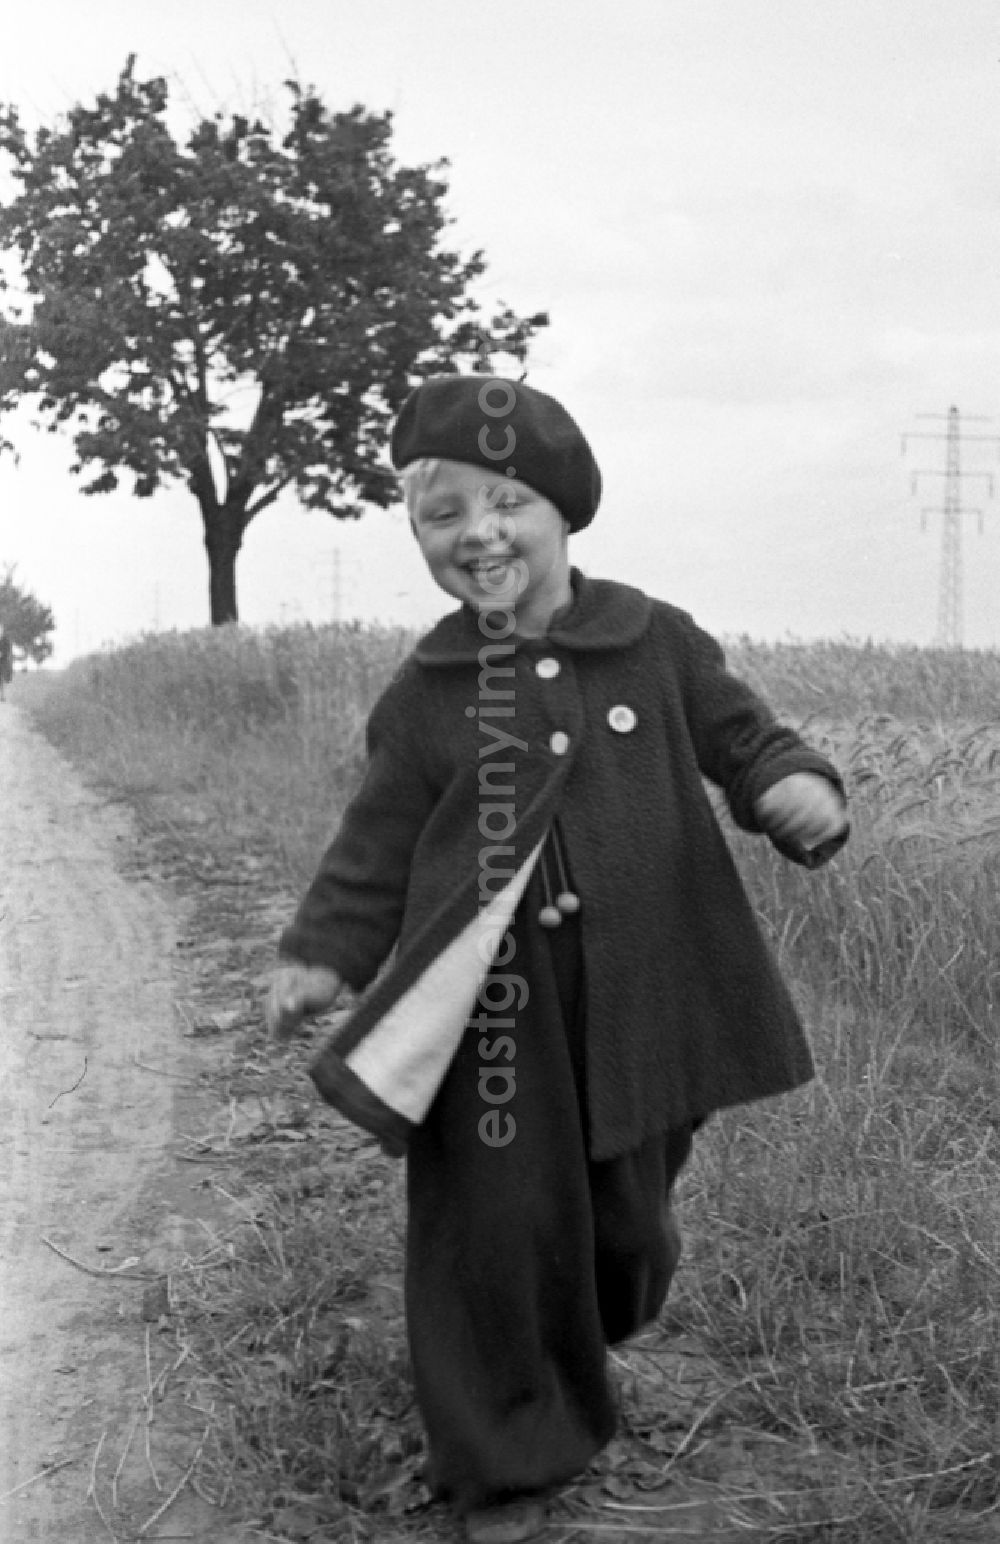 GDR image archive: Merseburg - A small child in baggy trousers and with beret runs on a country lane in Merseburg in the federal state Saxony-Anhalt in the area of the former GDR, German democratic republic